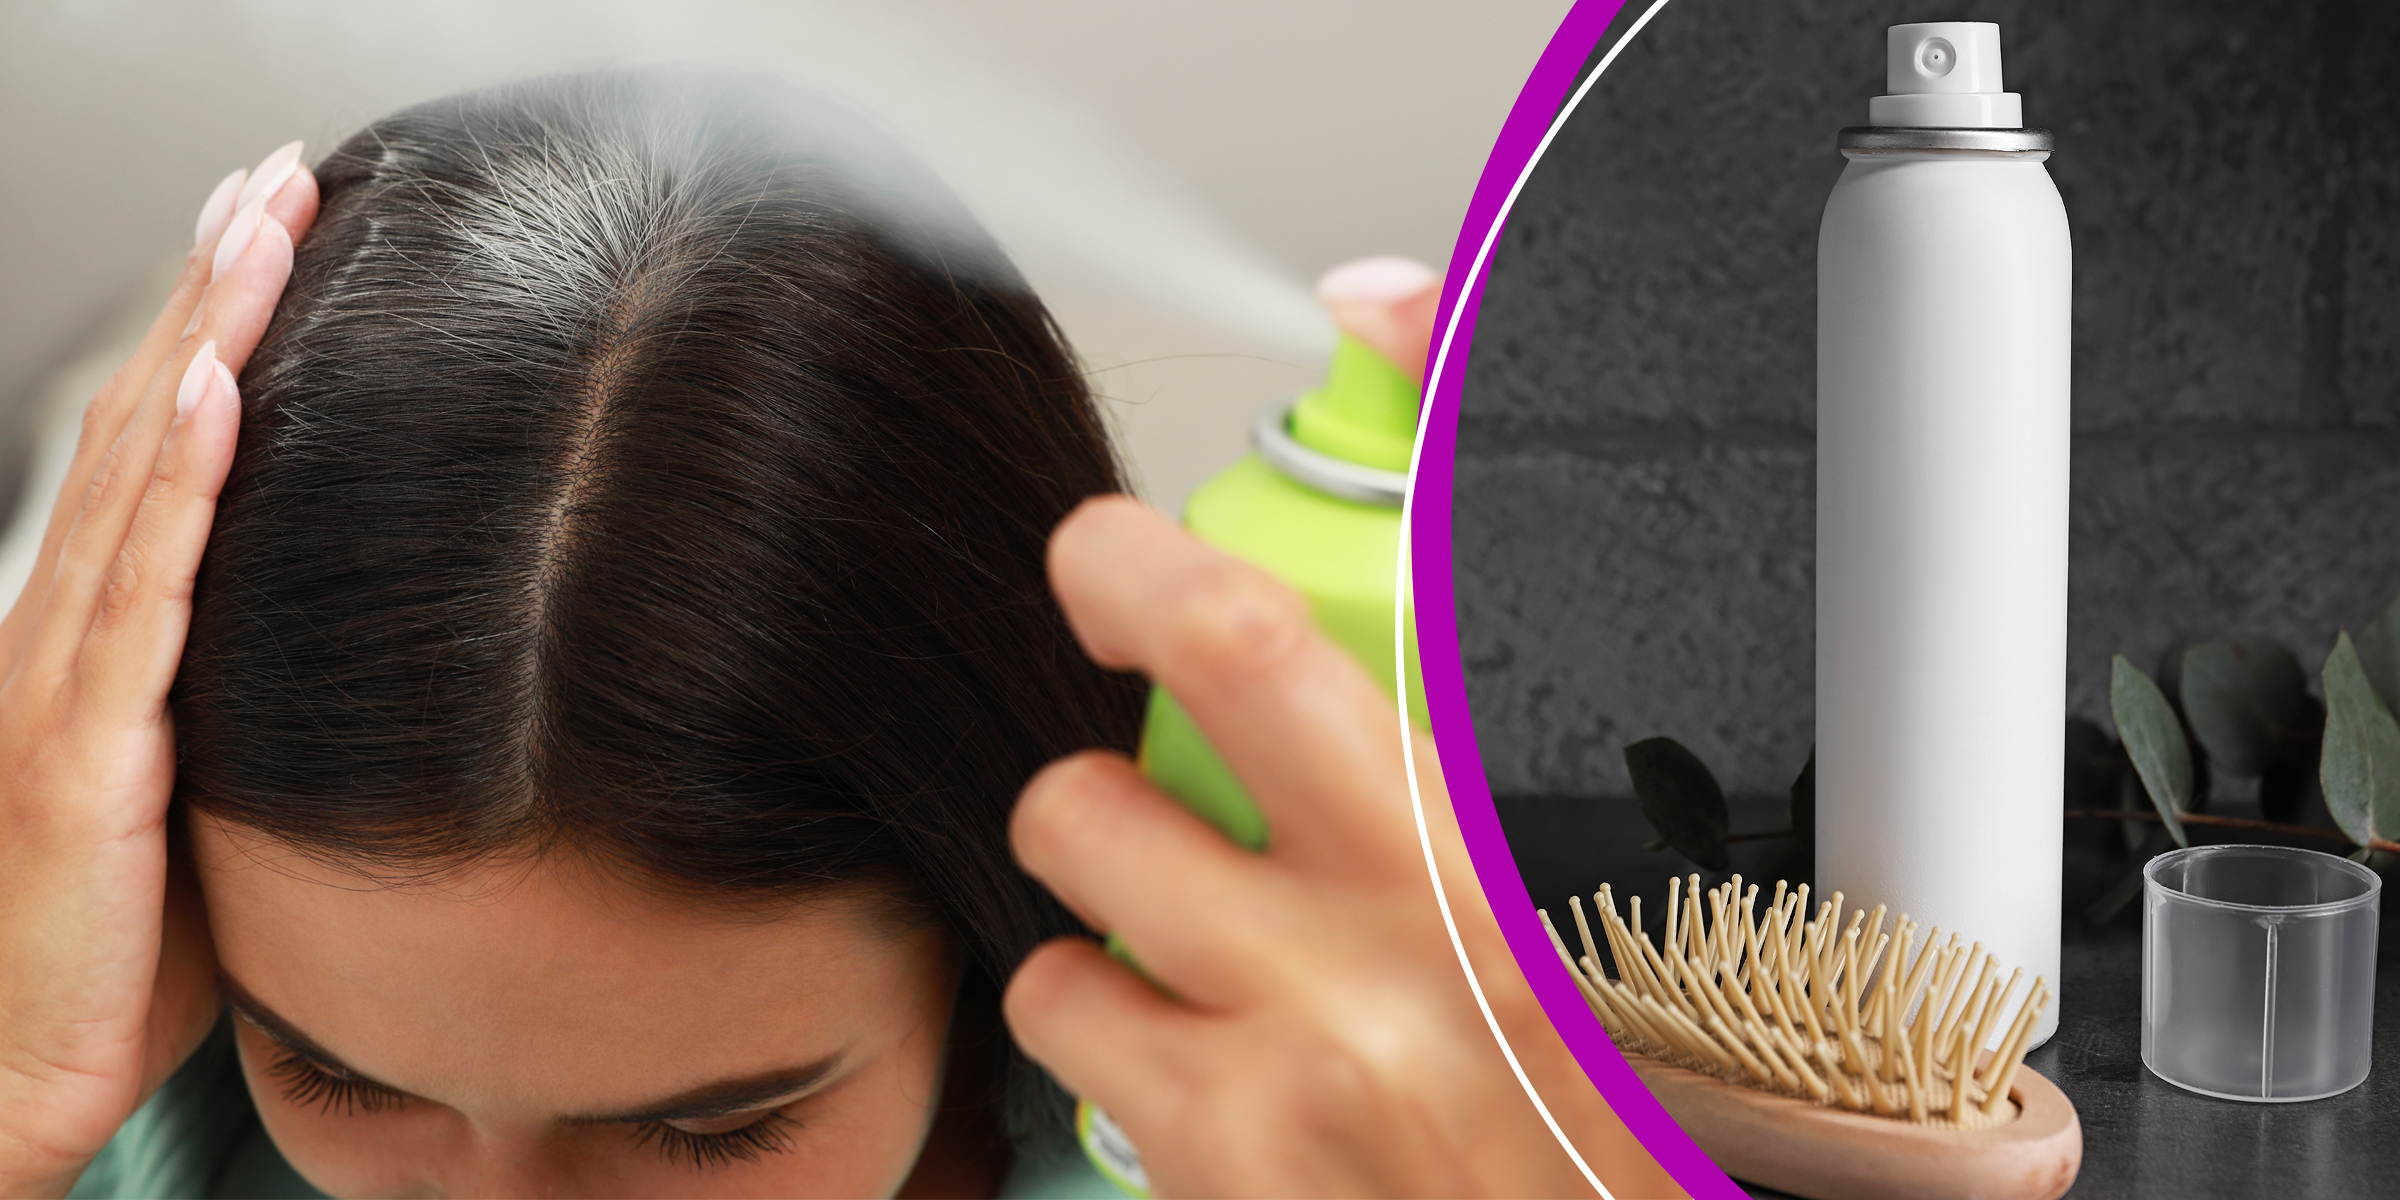 Photo of a woman showing her scalp | Can of dry shampoo and brush | Source: Shutterstock